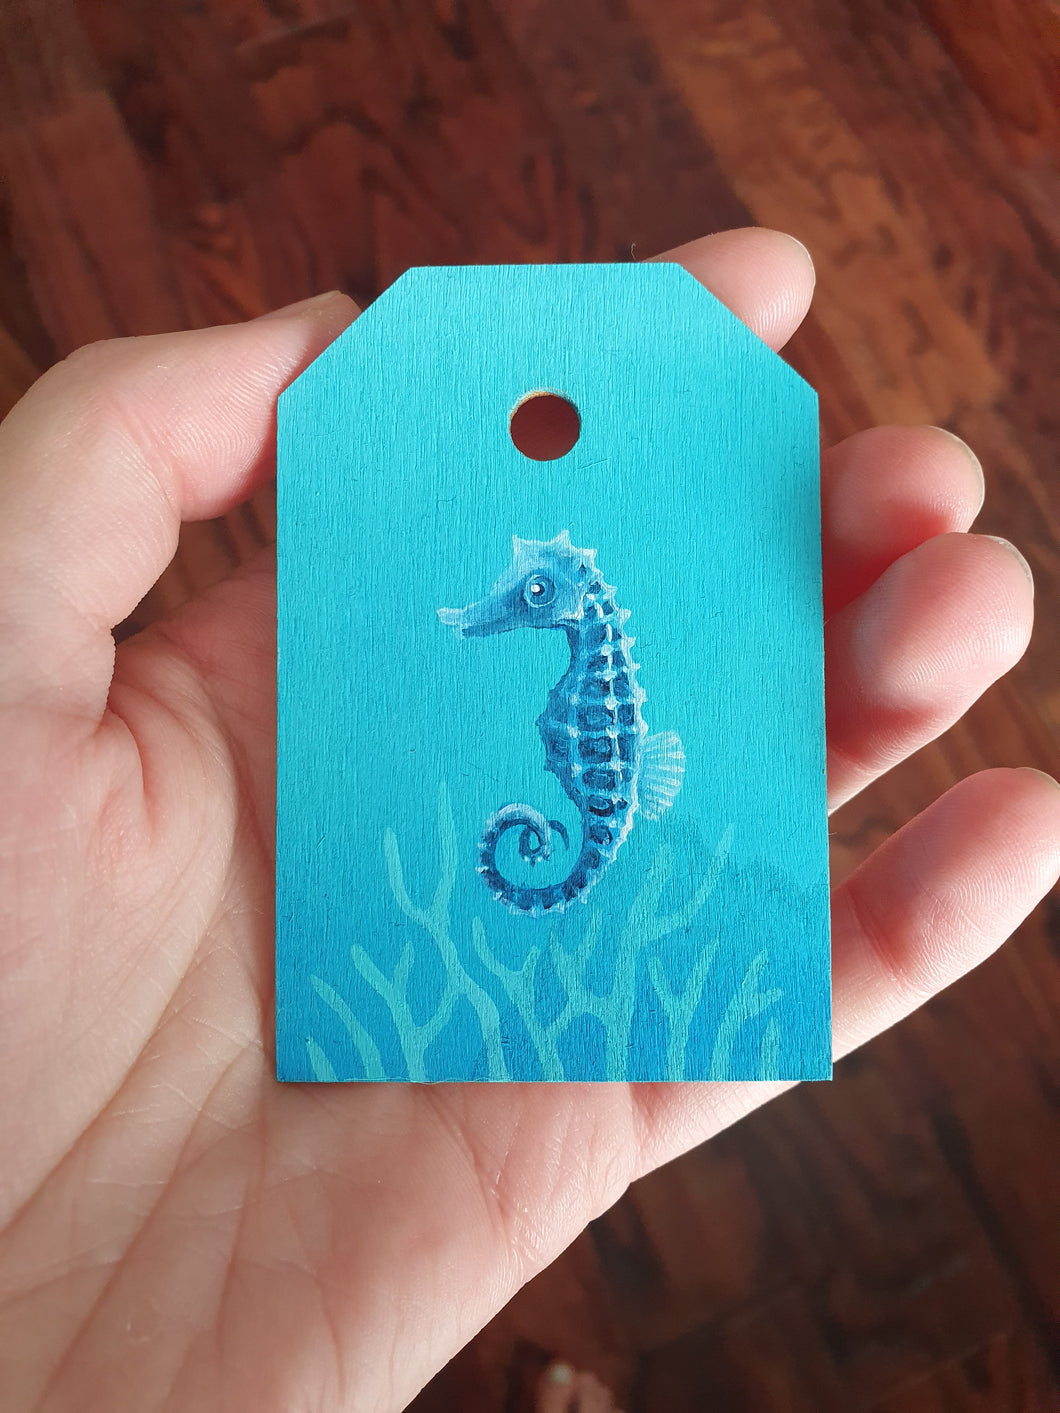 Seahorse - Day 26 of 365 of Daily Visions